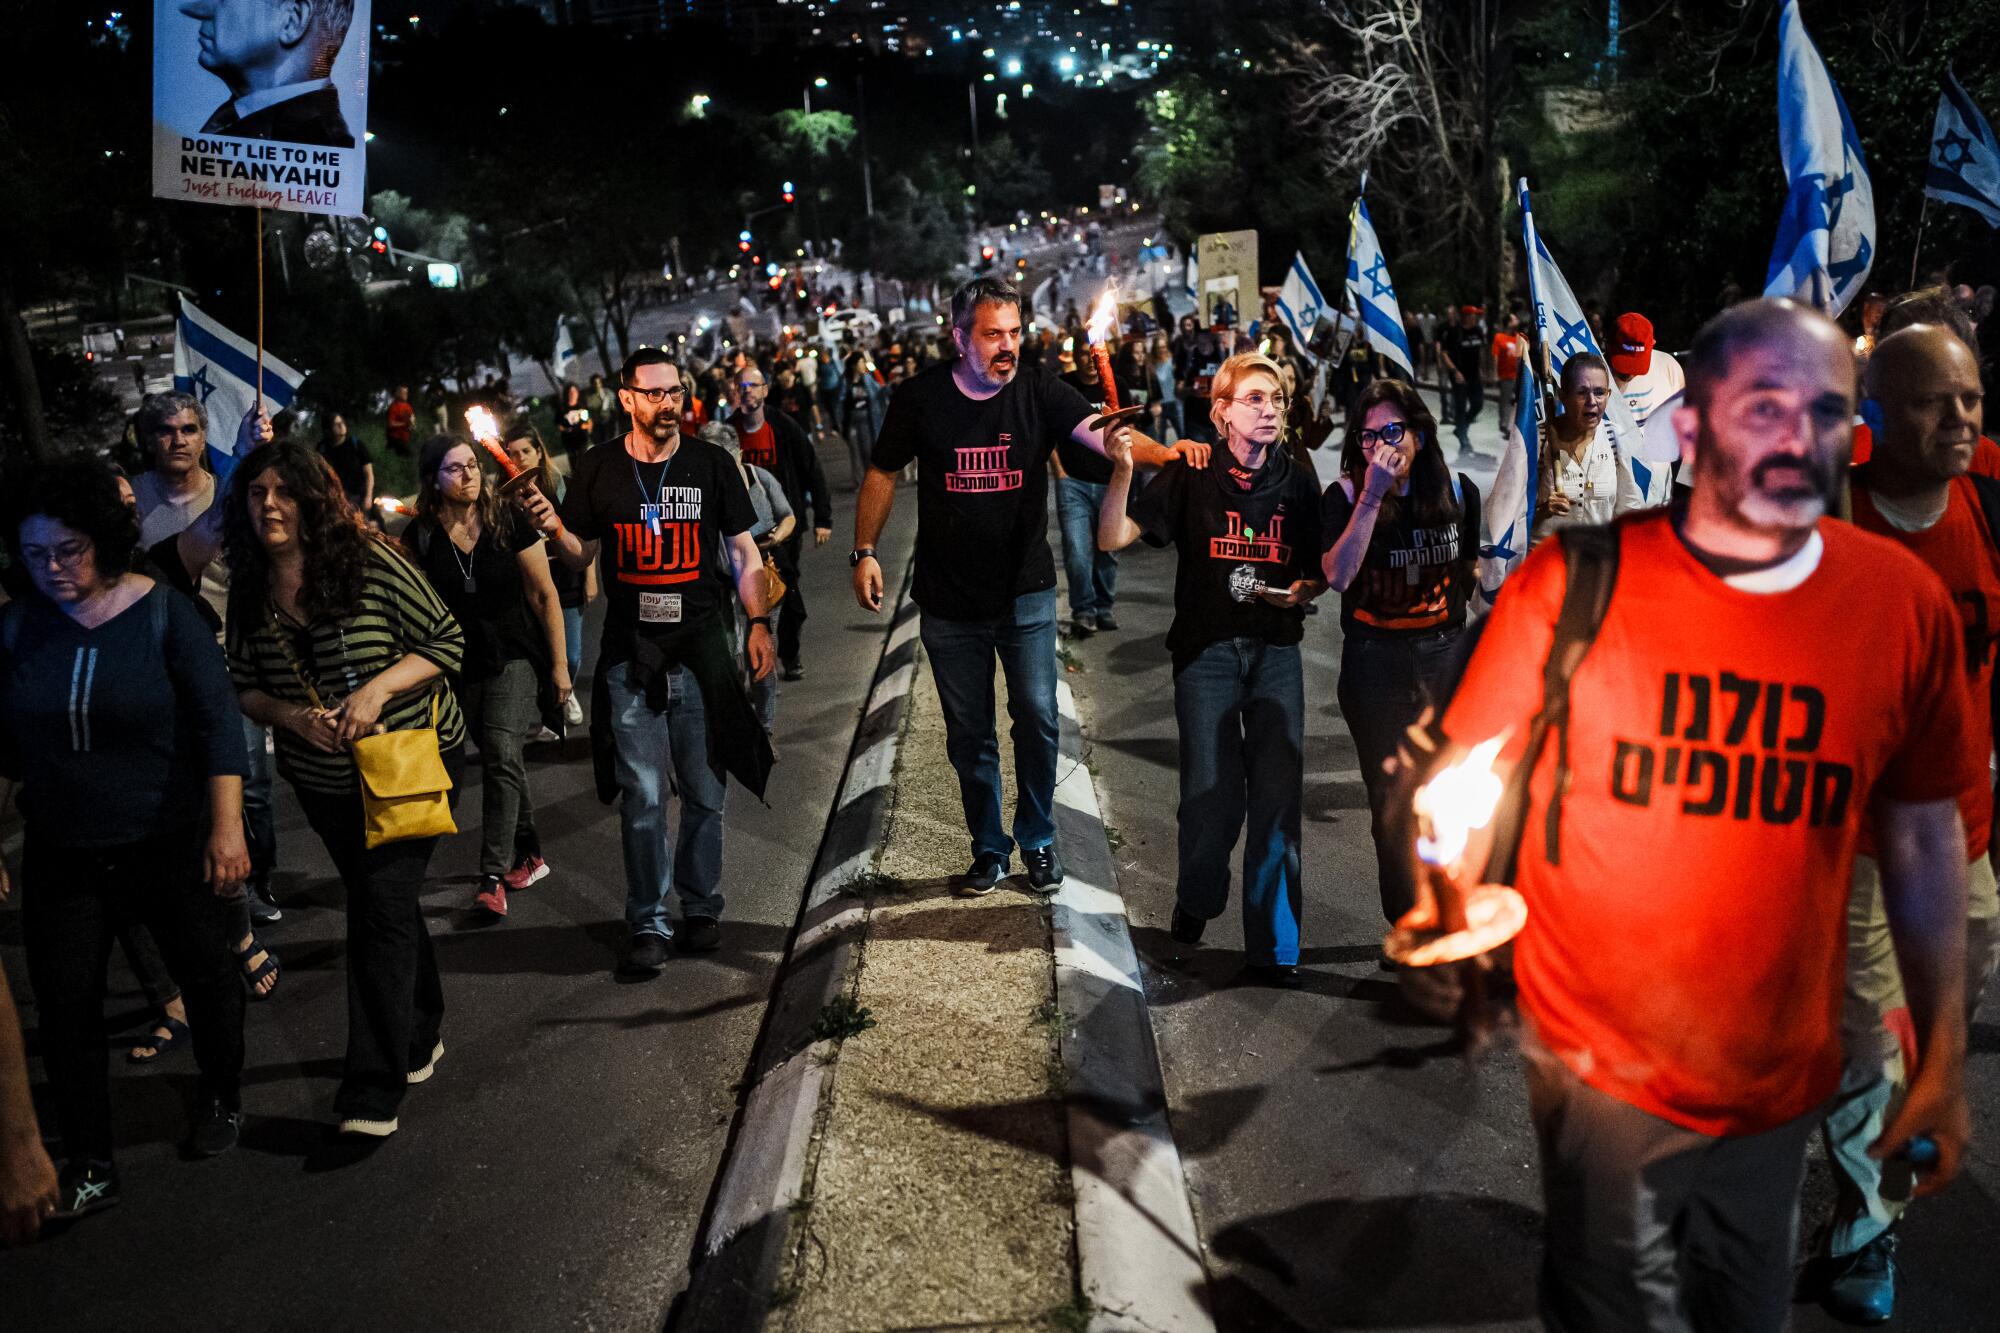 Anti-government demonstrators march up a hill towards central Jerusalem, Israel, Tuesday, 